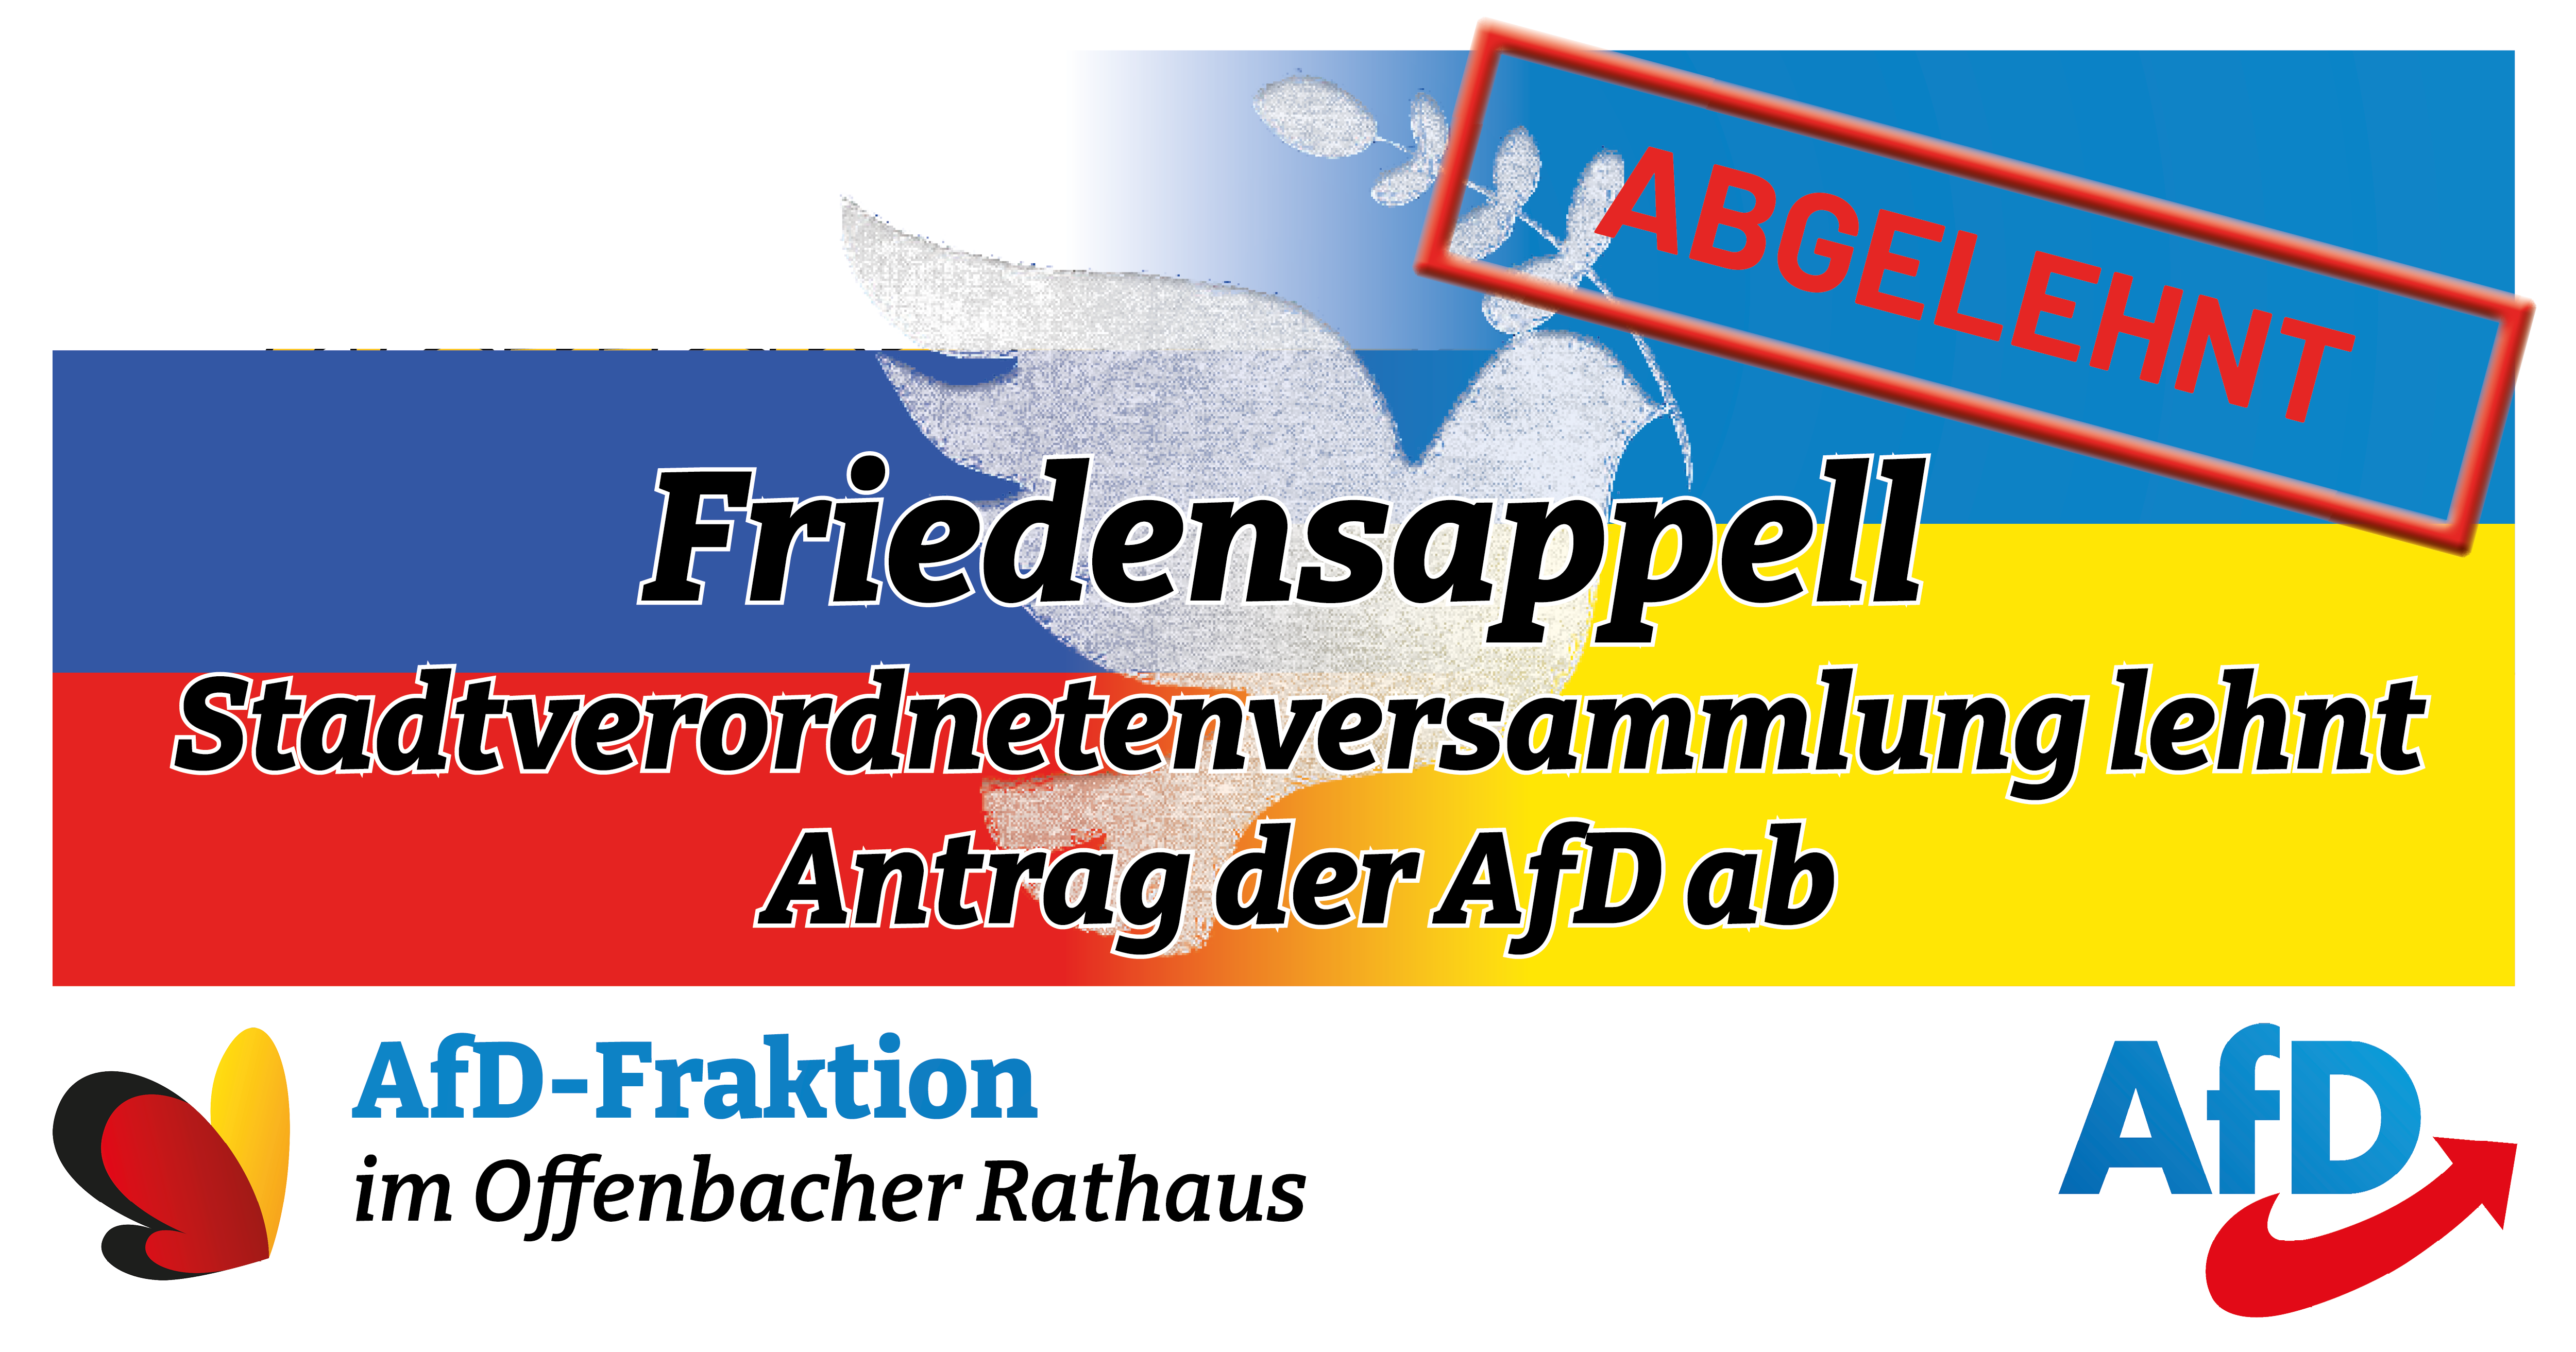 You are currently viewing Friedensappell der AfD abgelehnt!